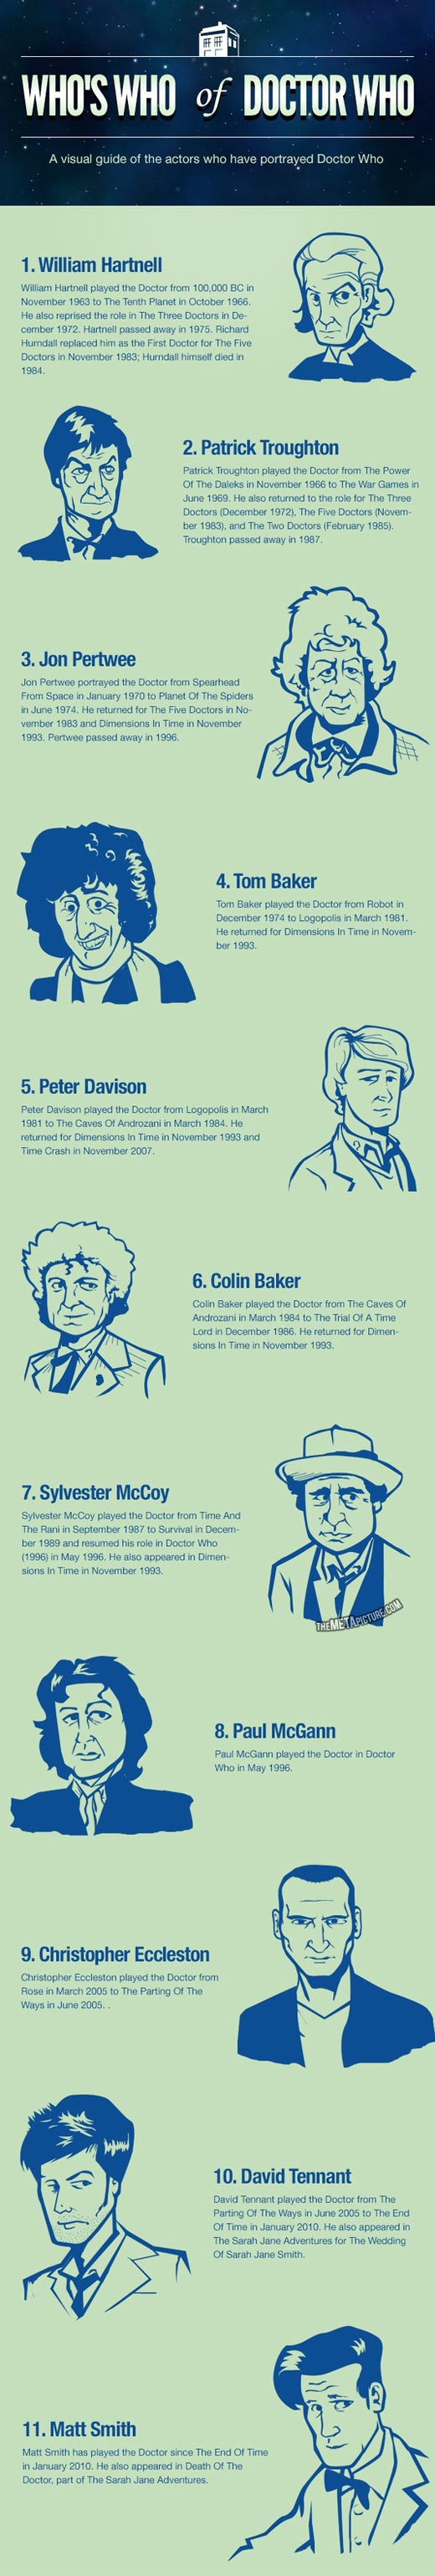 Who's Who of Doctor Who.